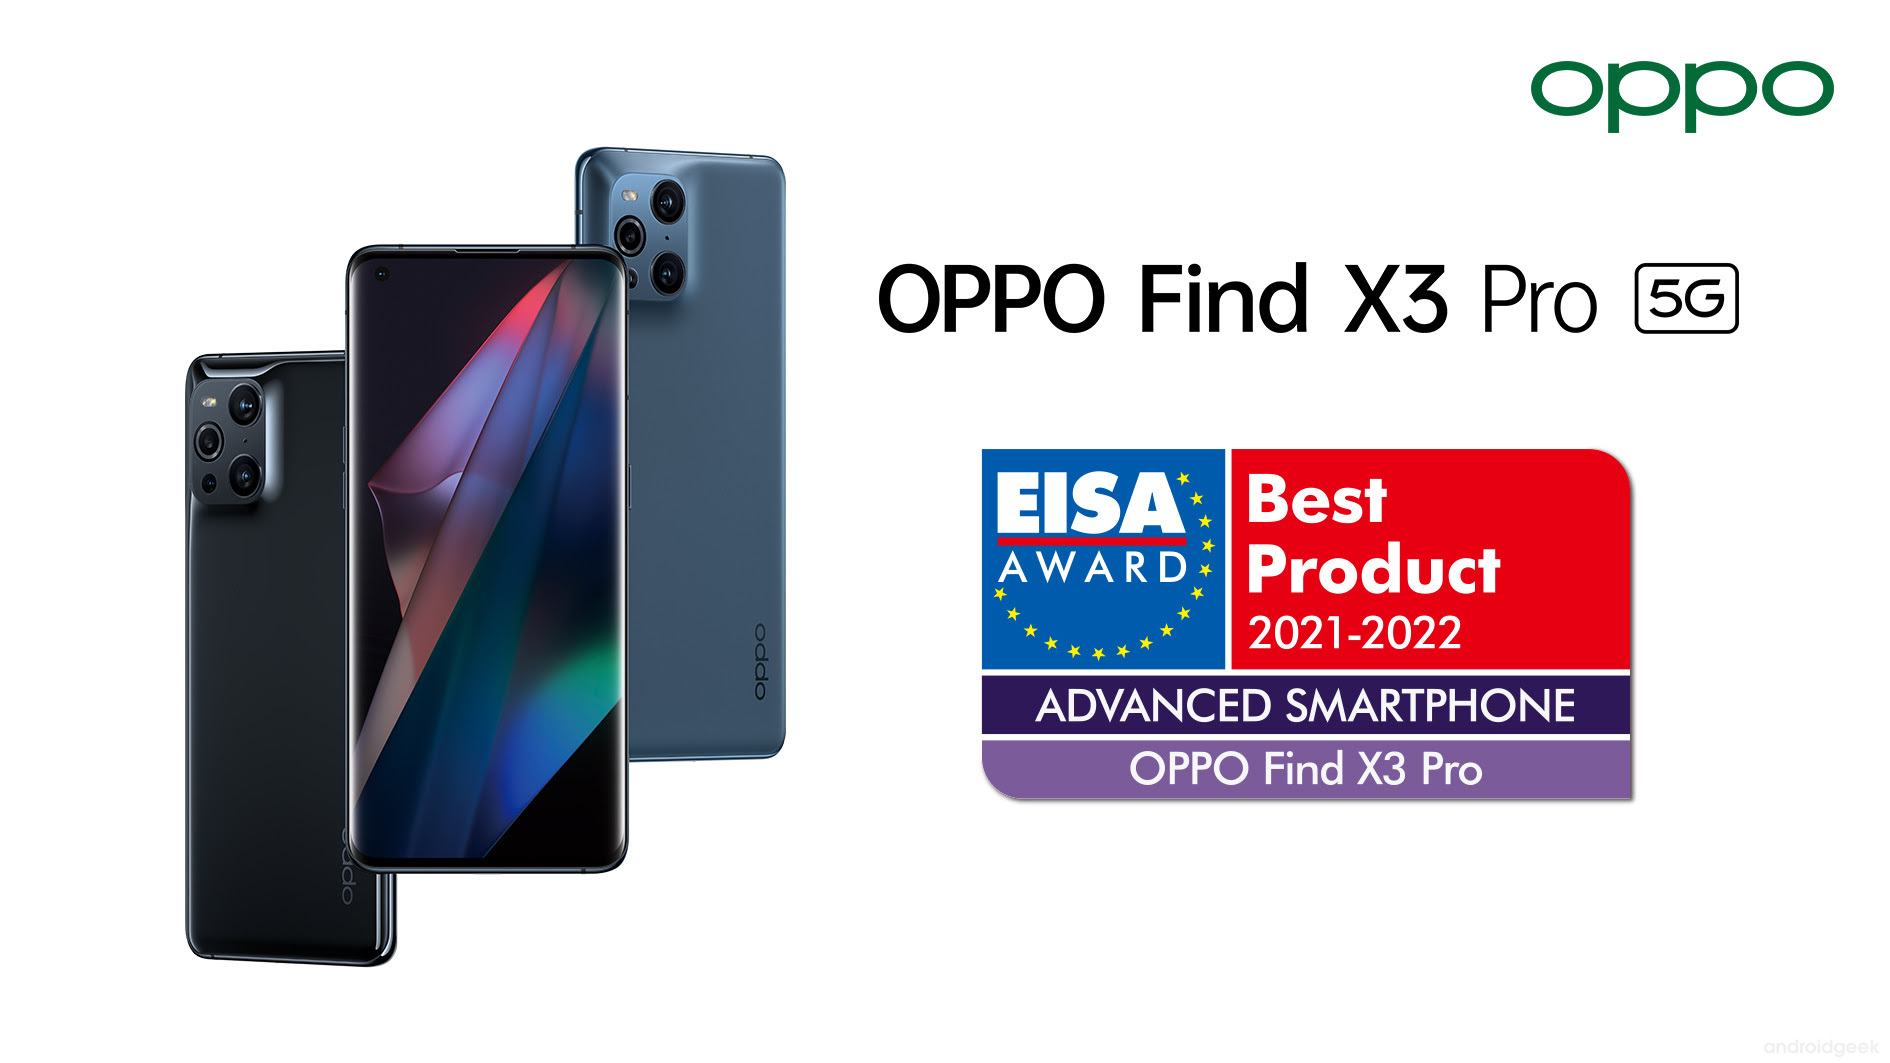 OPPO Find X3 Pro 5G vence ‘EISA BEST PRODUCT ADVANCED SMARTPHONE 2021-2022’ 1